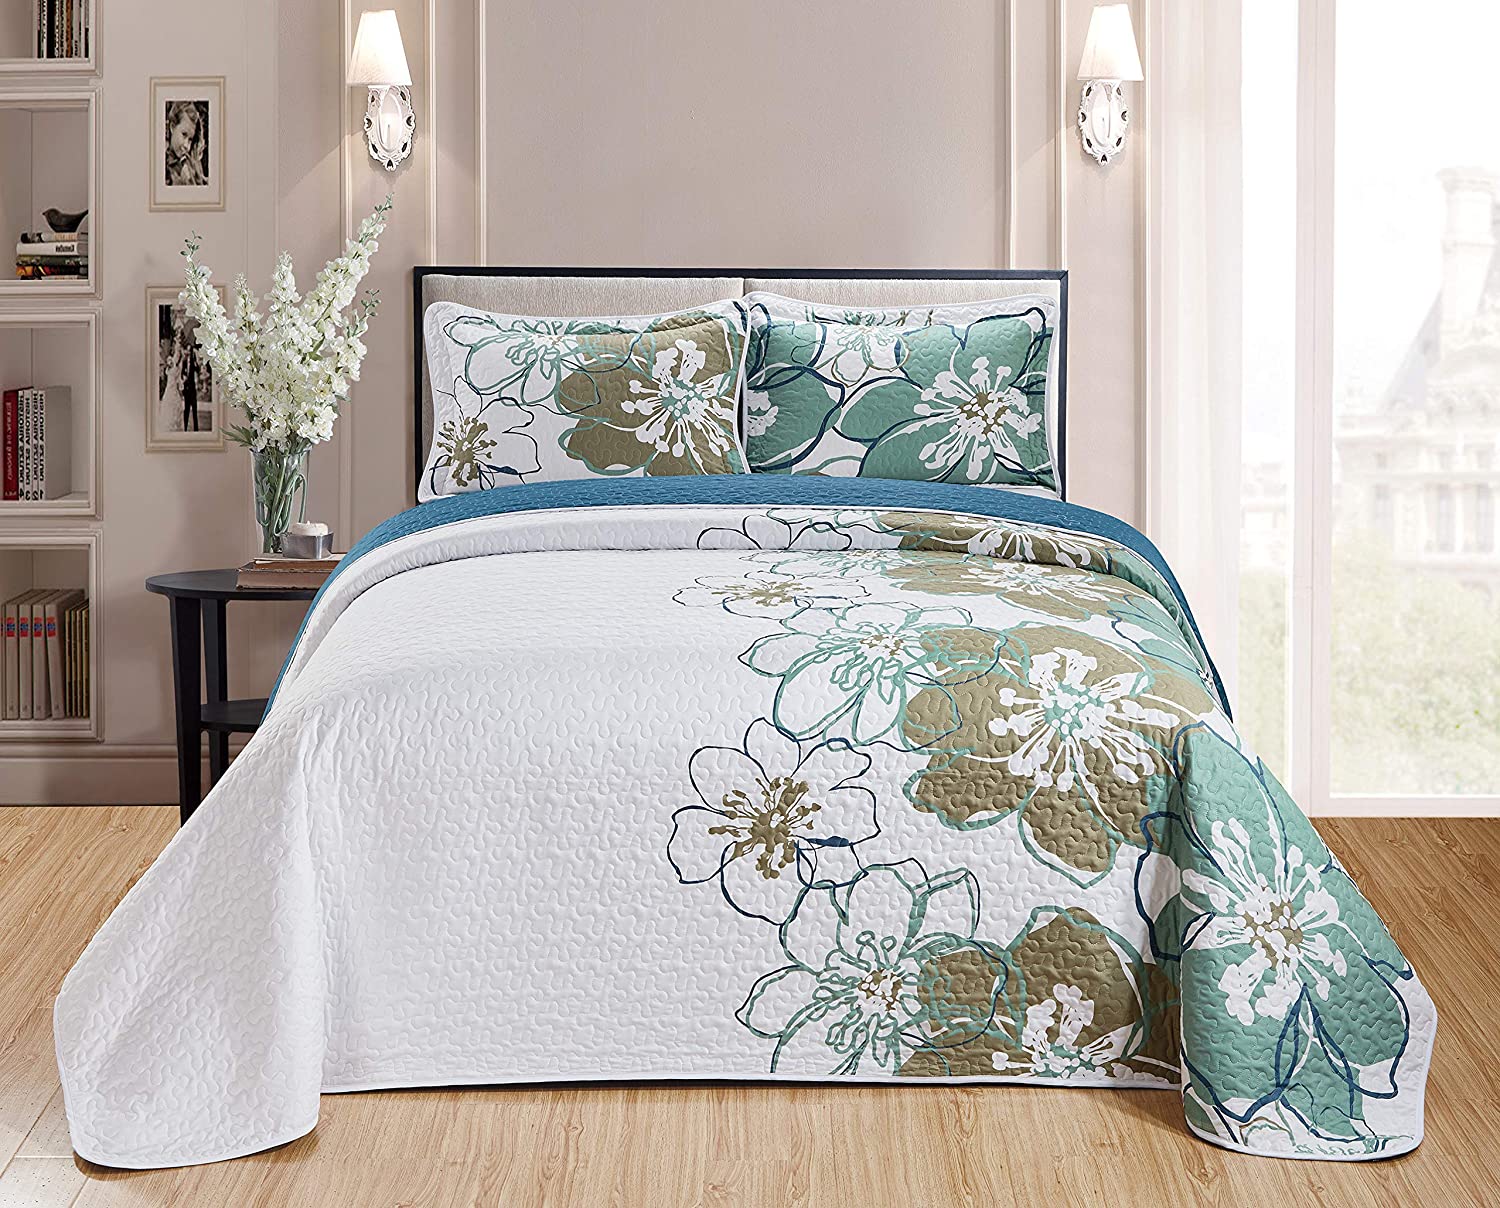 Details about   Home Collection Quilt Bedspread Set Over Size Flowers Printed Grey Turquoise Kin 